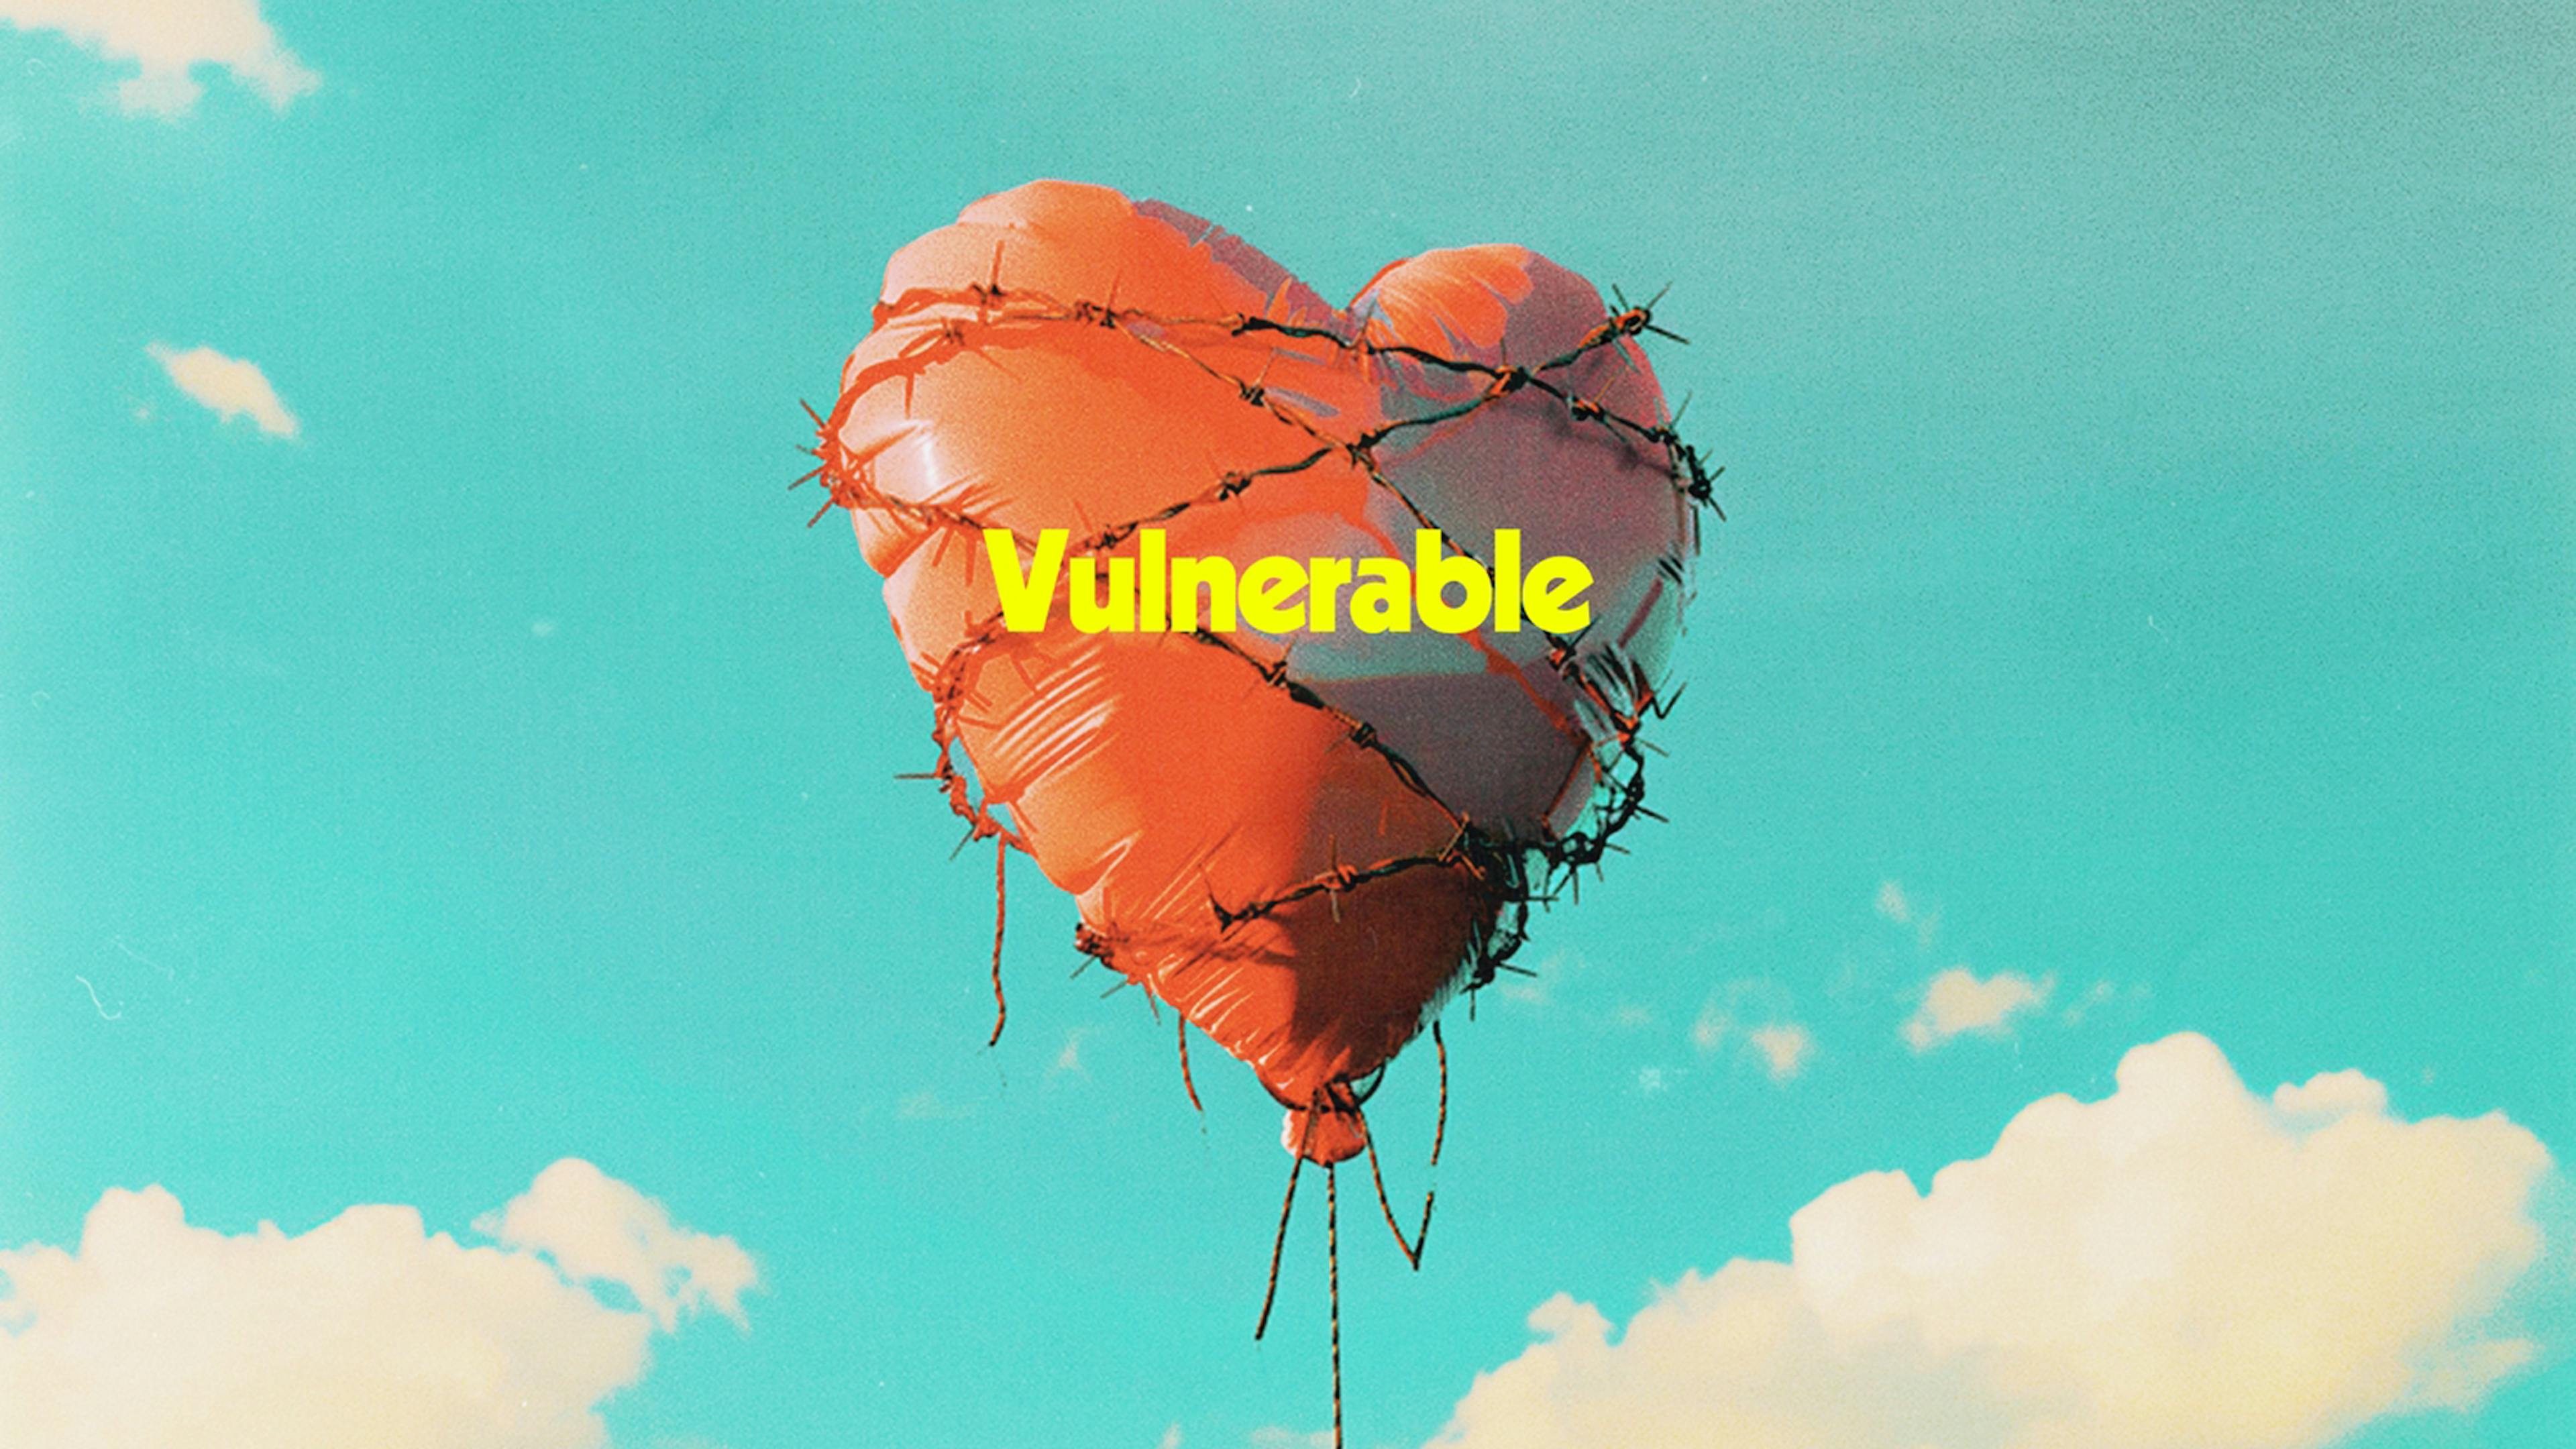 Listen to Kids In Glass Houses’ new single, Vulnerable